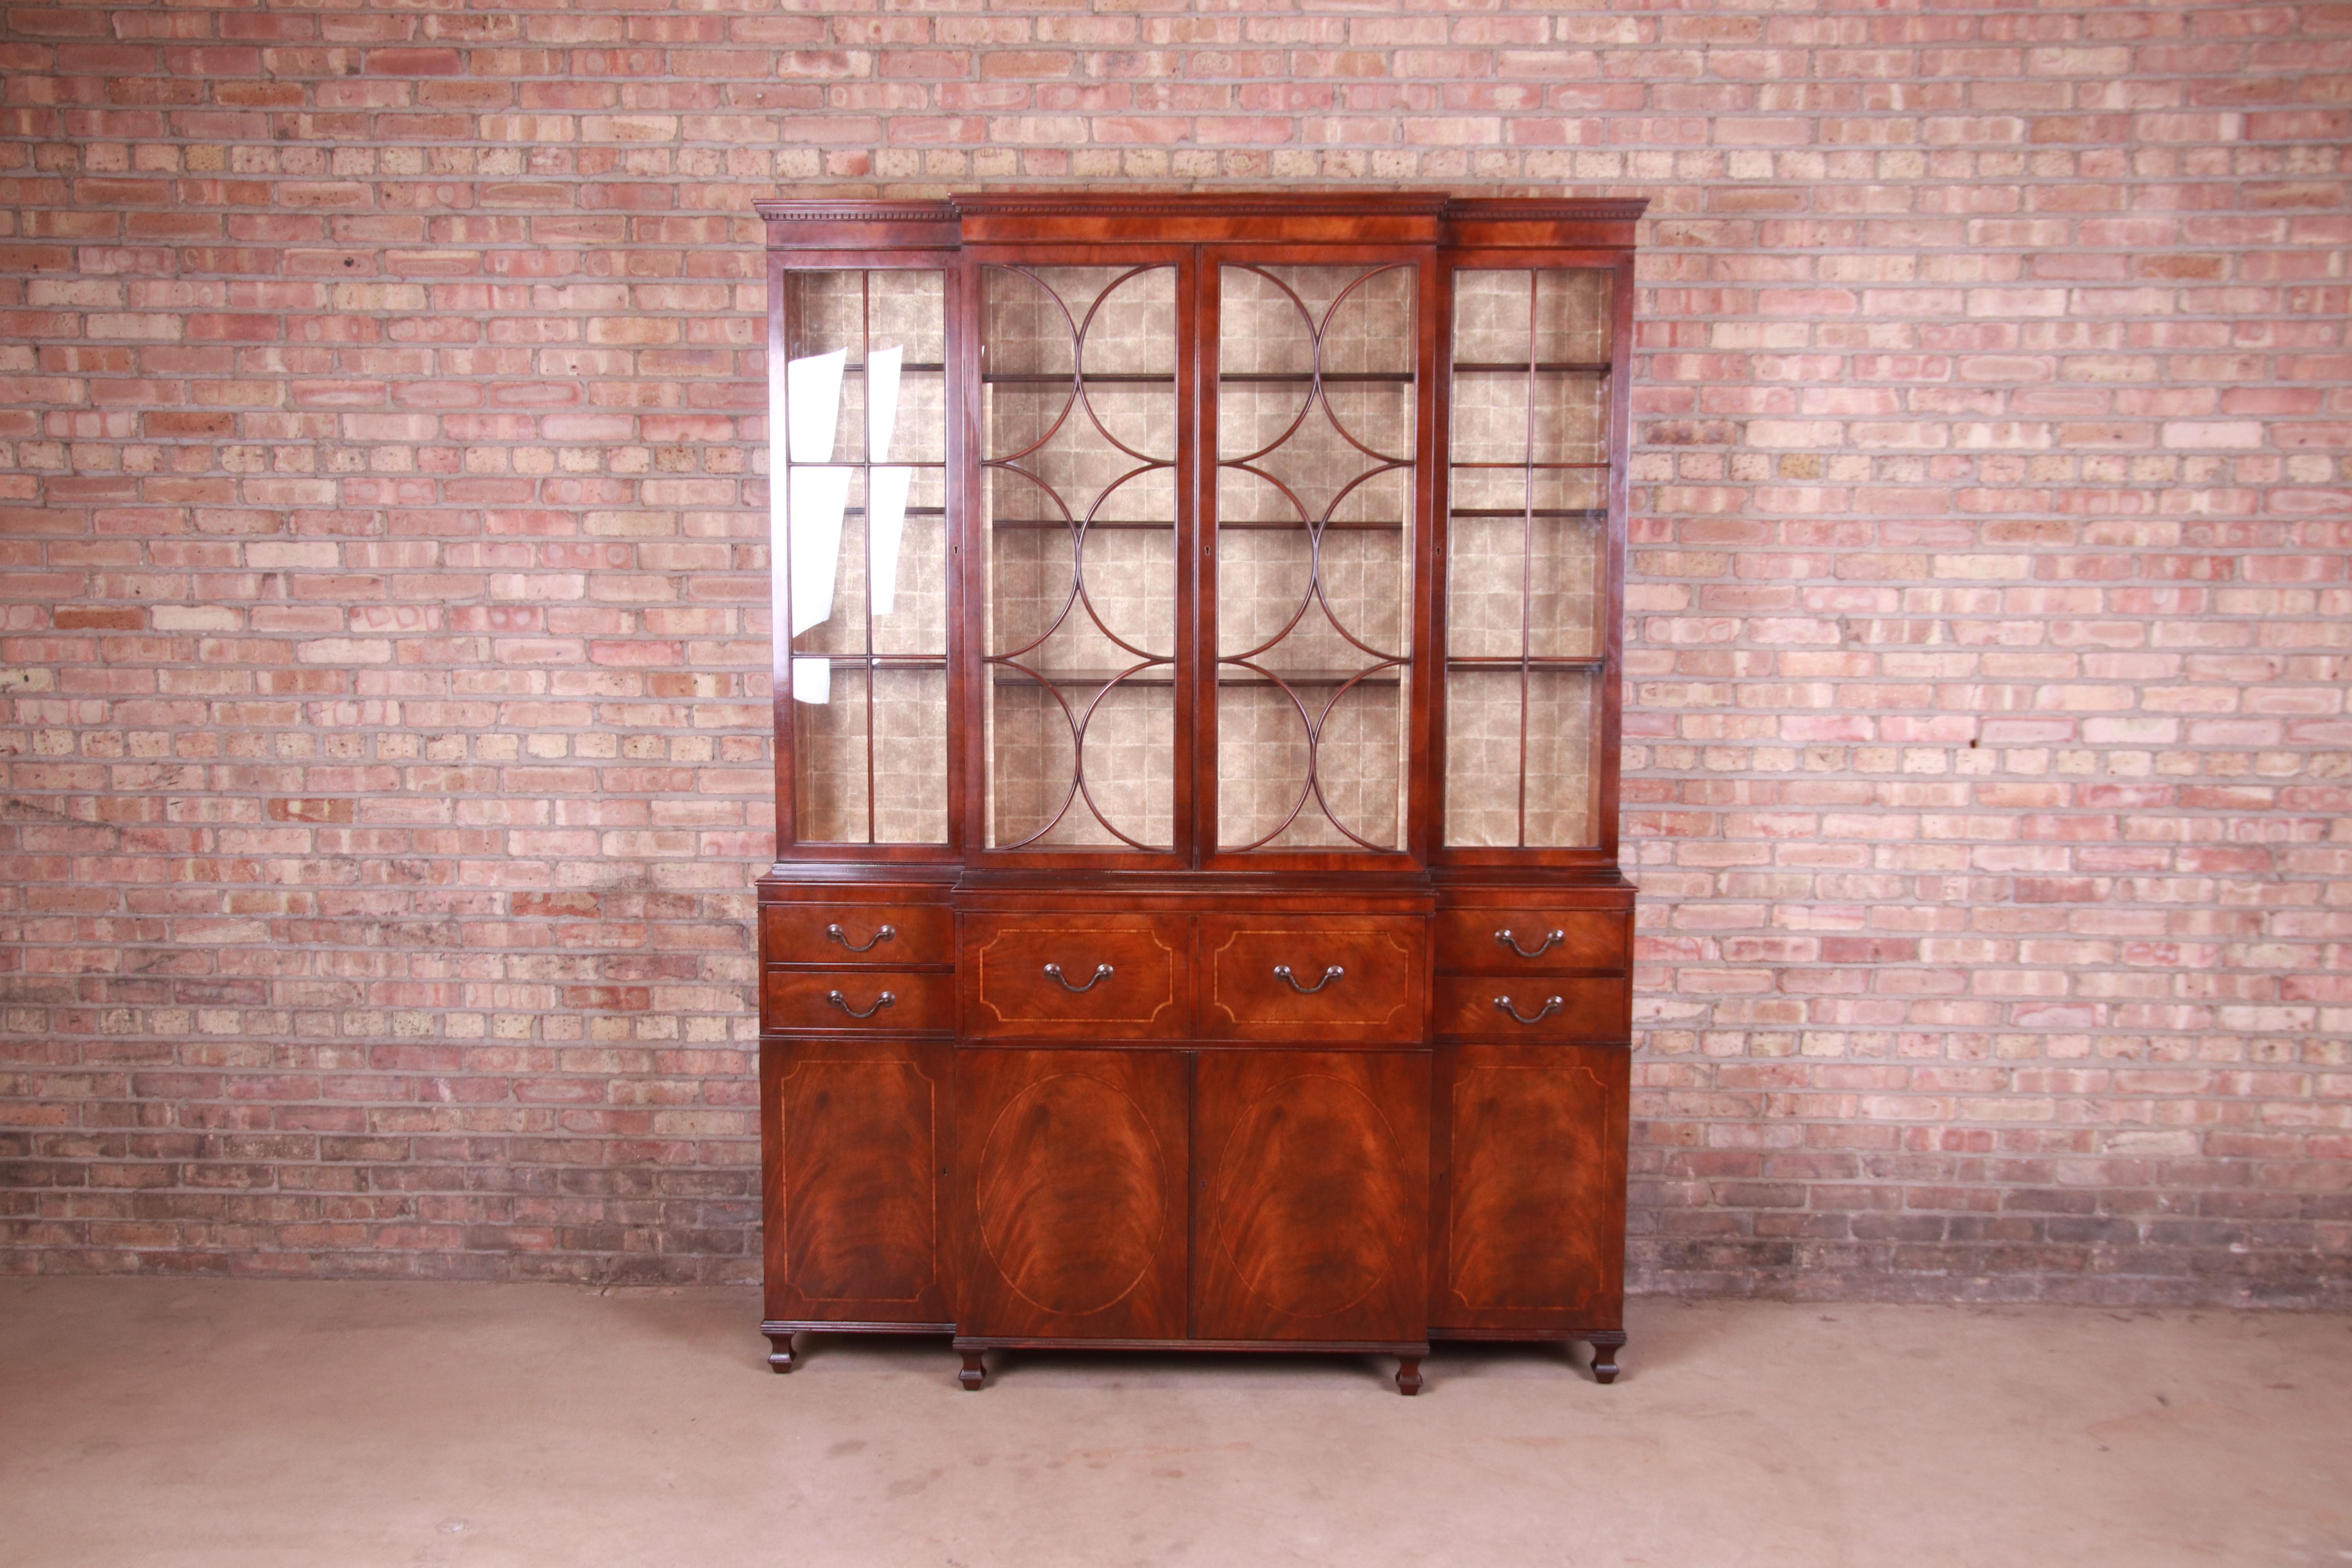 A gorgeous English Georgian style breakfront bookcase cabinet with drop-front secretary desk

By Baker Furniture

USA, Circa 1940s

Book-matched flame mahogany with satinwood inlay, mullioned glass front doors, wallpapered interior, original